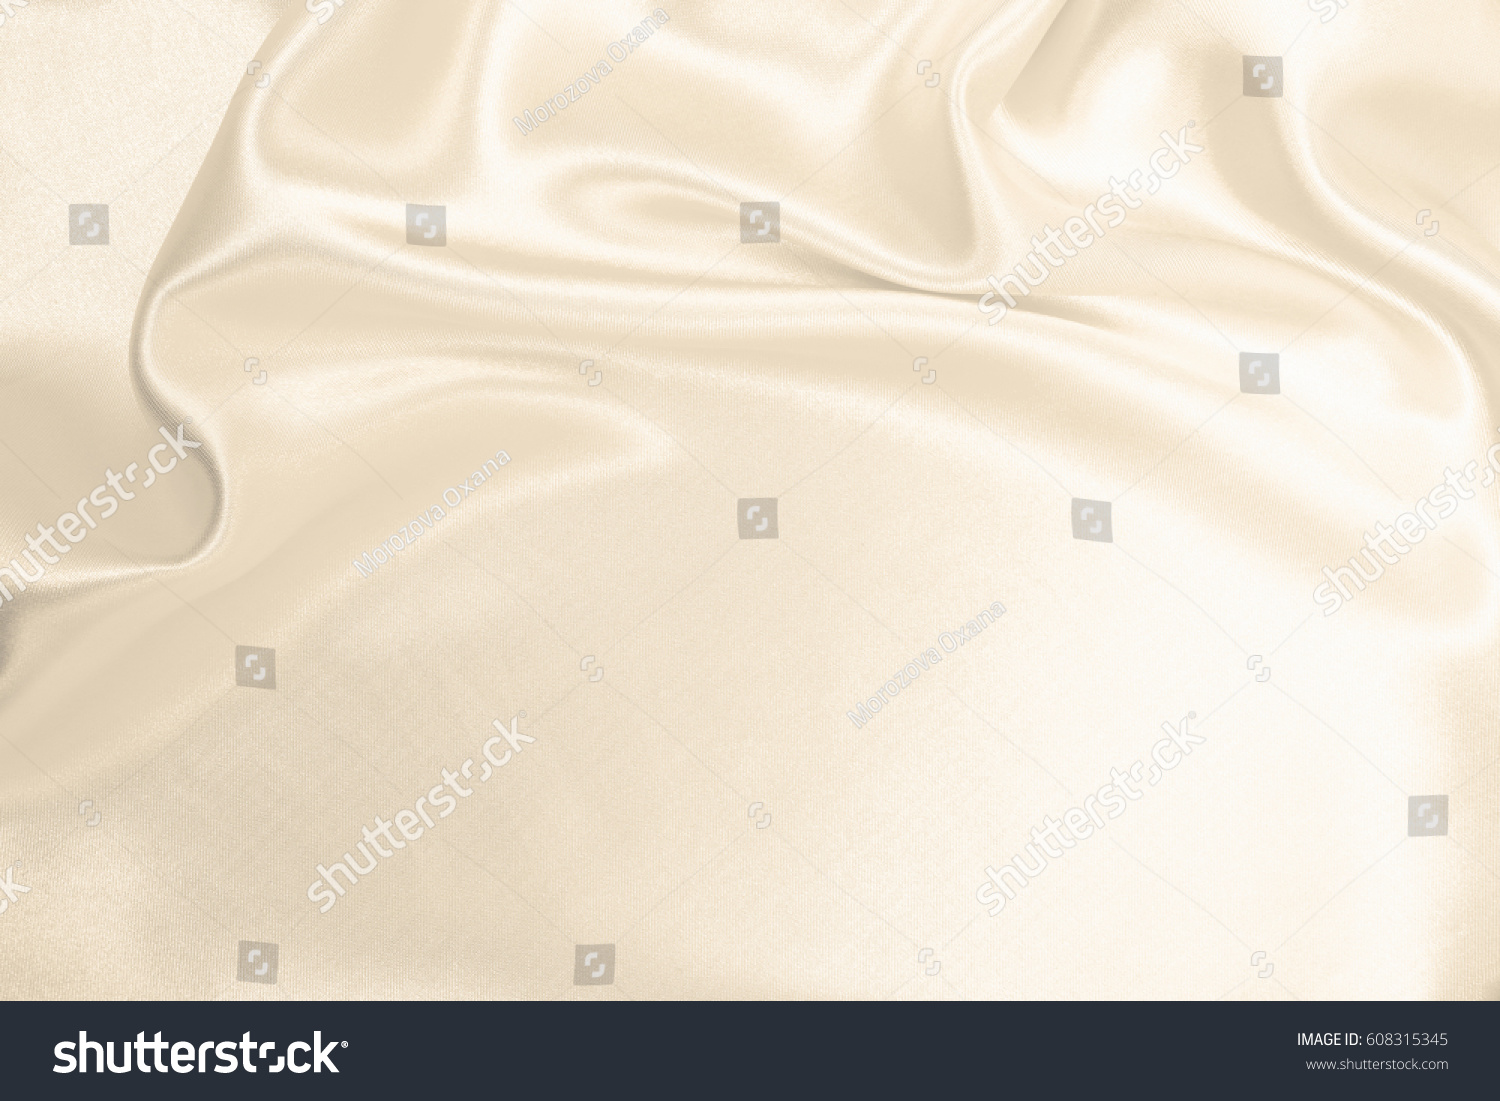 23,838 Champagne fabrics Images, Stock Photos & Vectors | Shutterstock